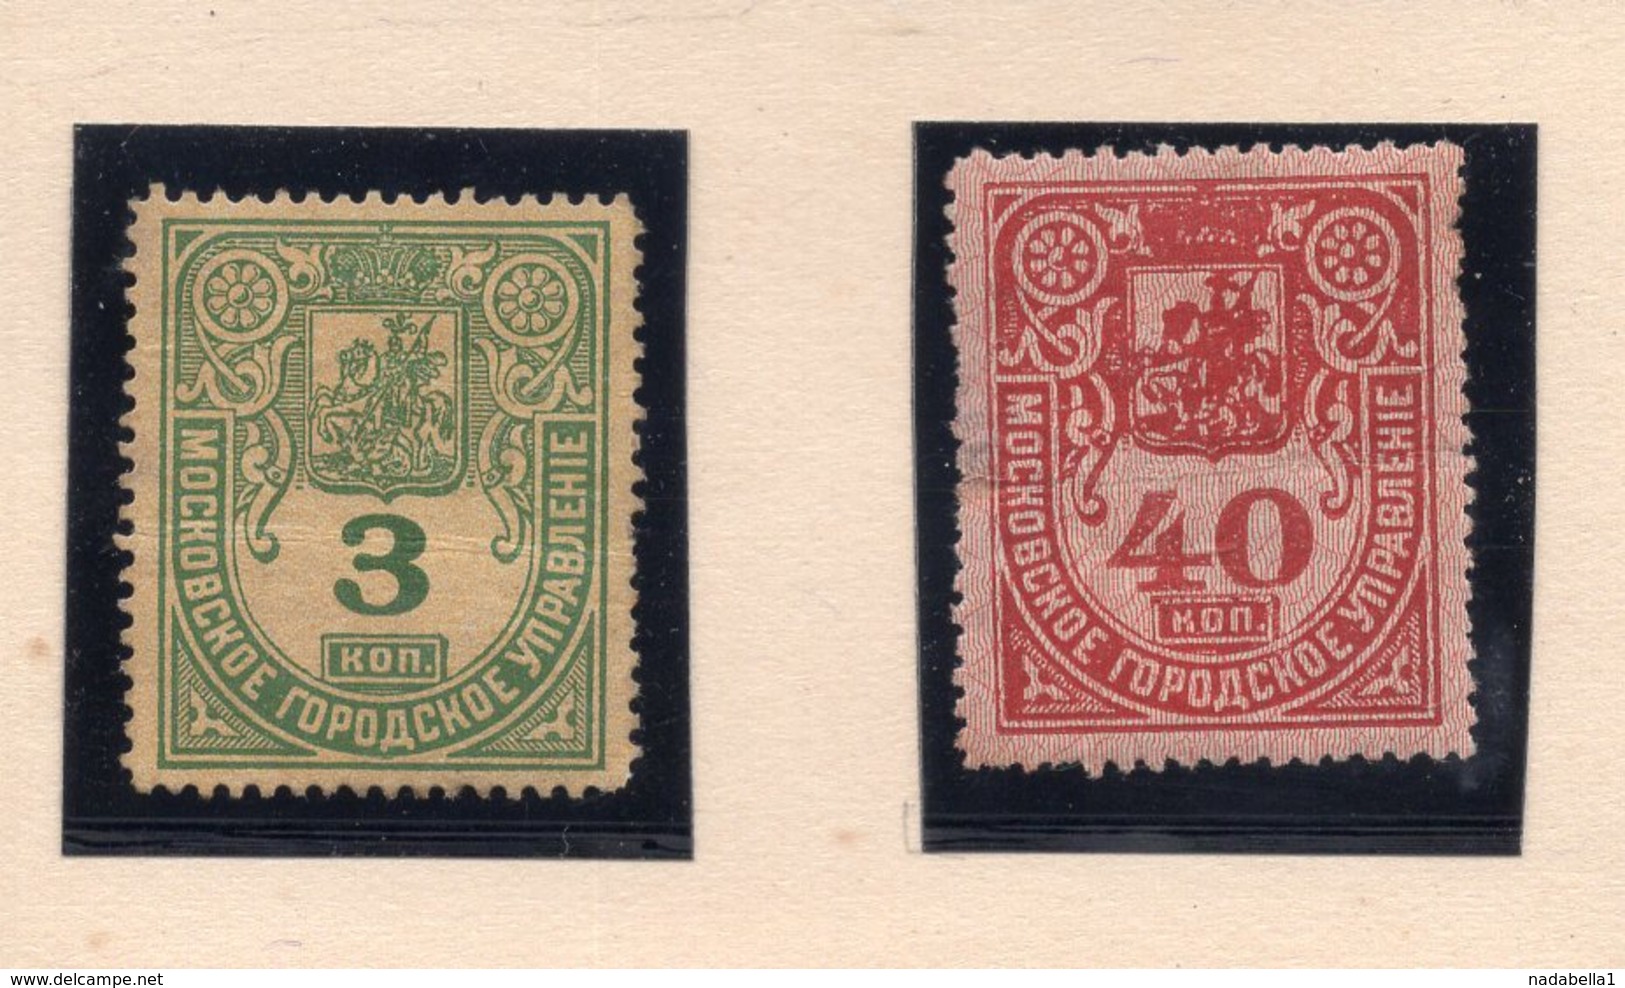 RUSSIA, MOSCOW, MUNICIPAL REVENUE STAMPS, 3 & 40 KOPEIKA, MH - Fiscaux